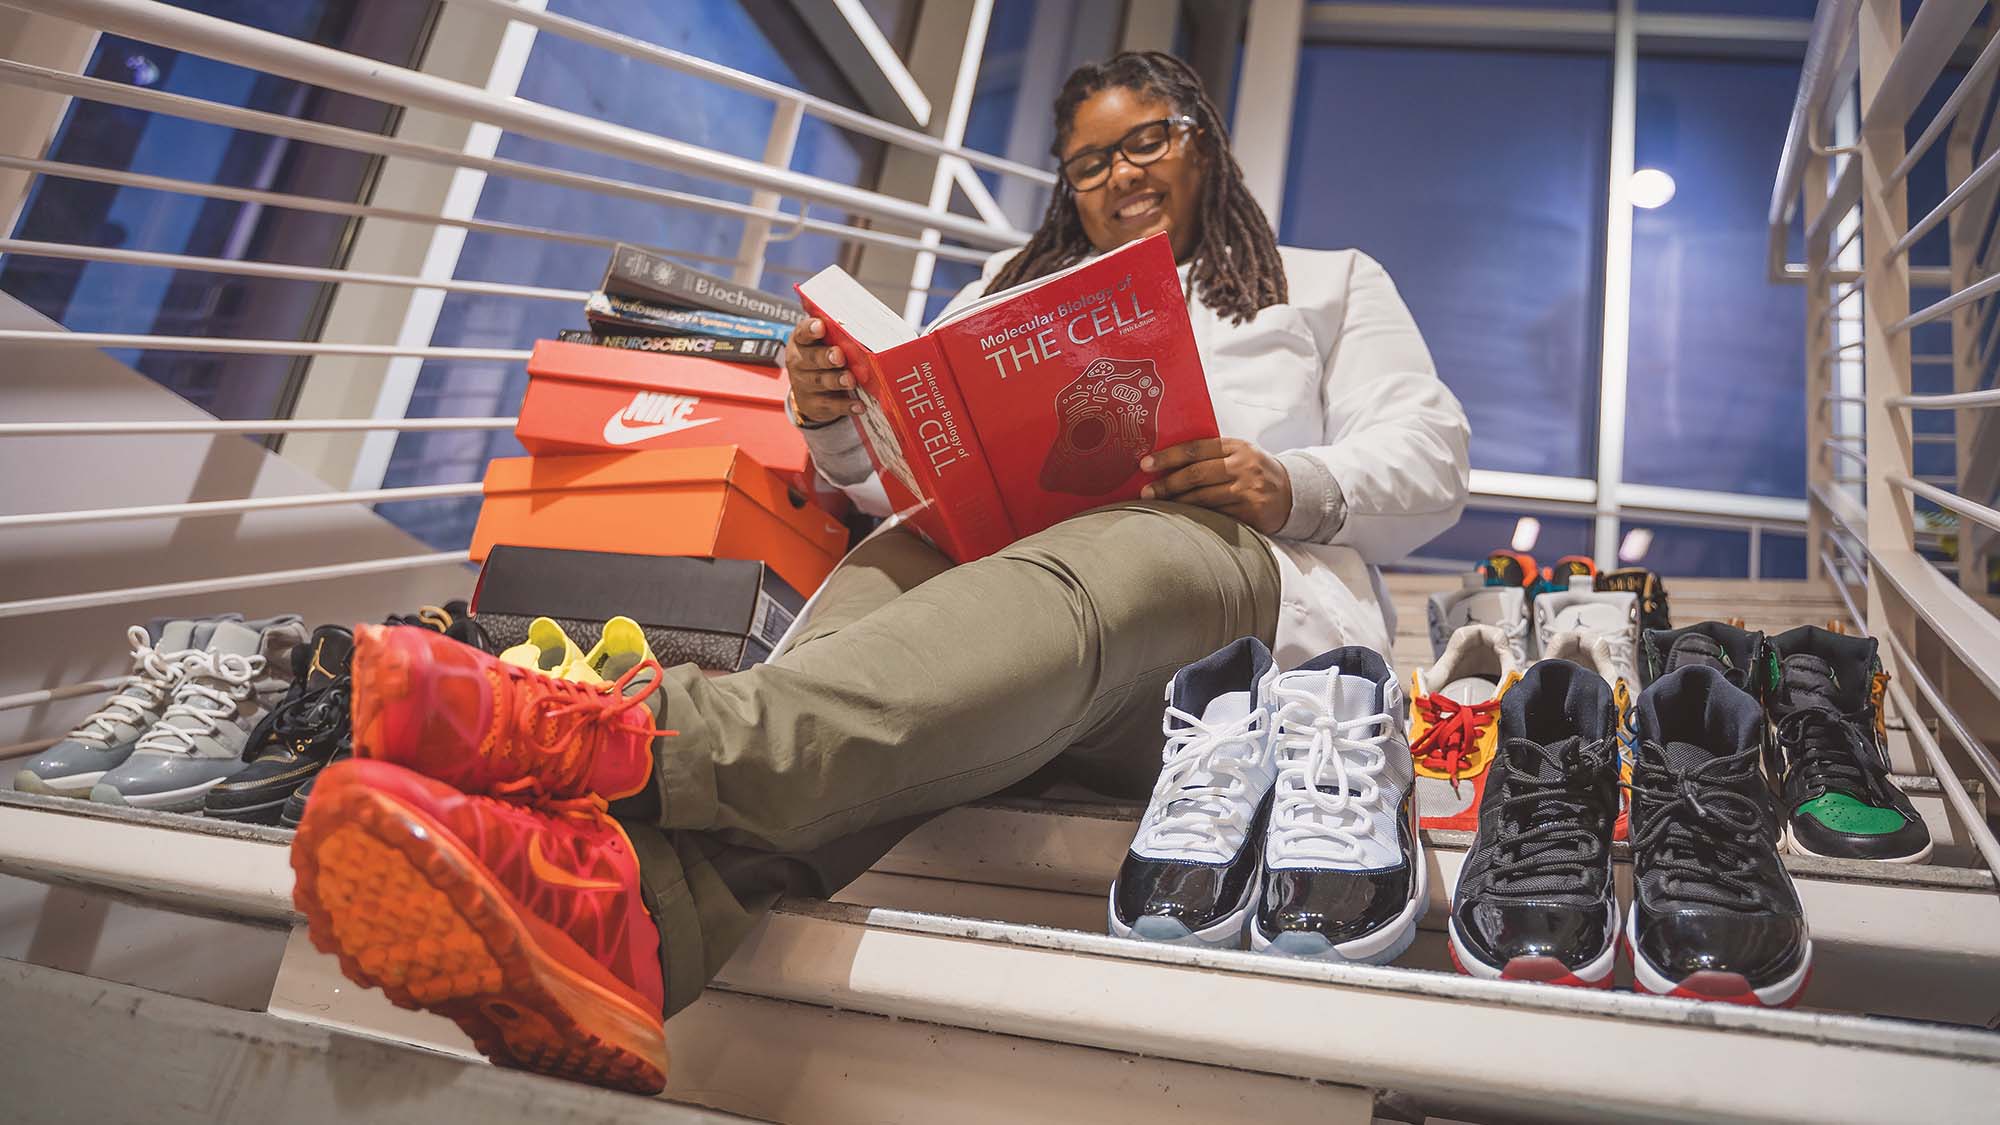 Kyla reading with sneakers